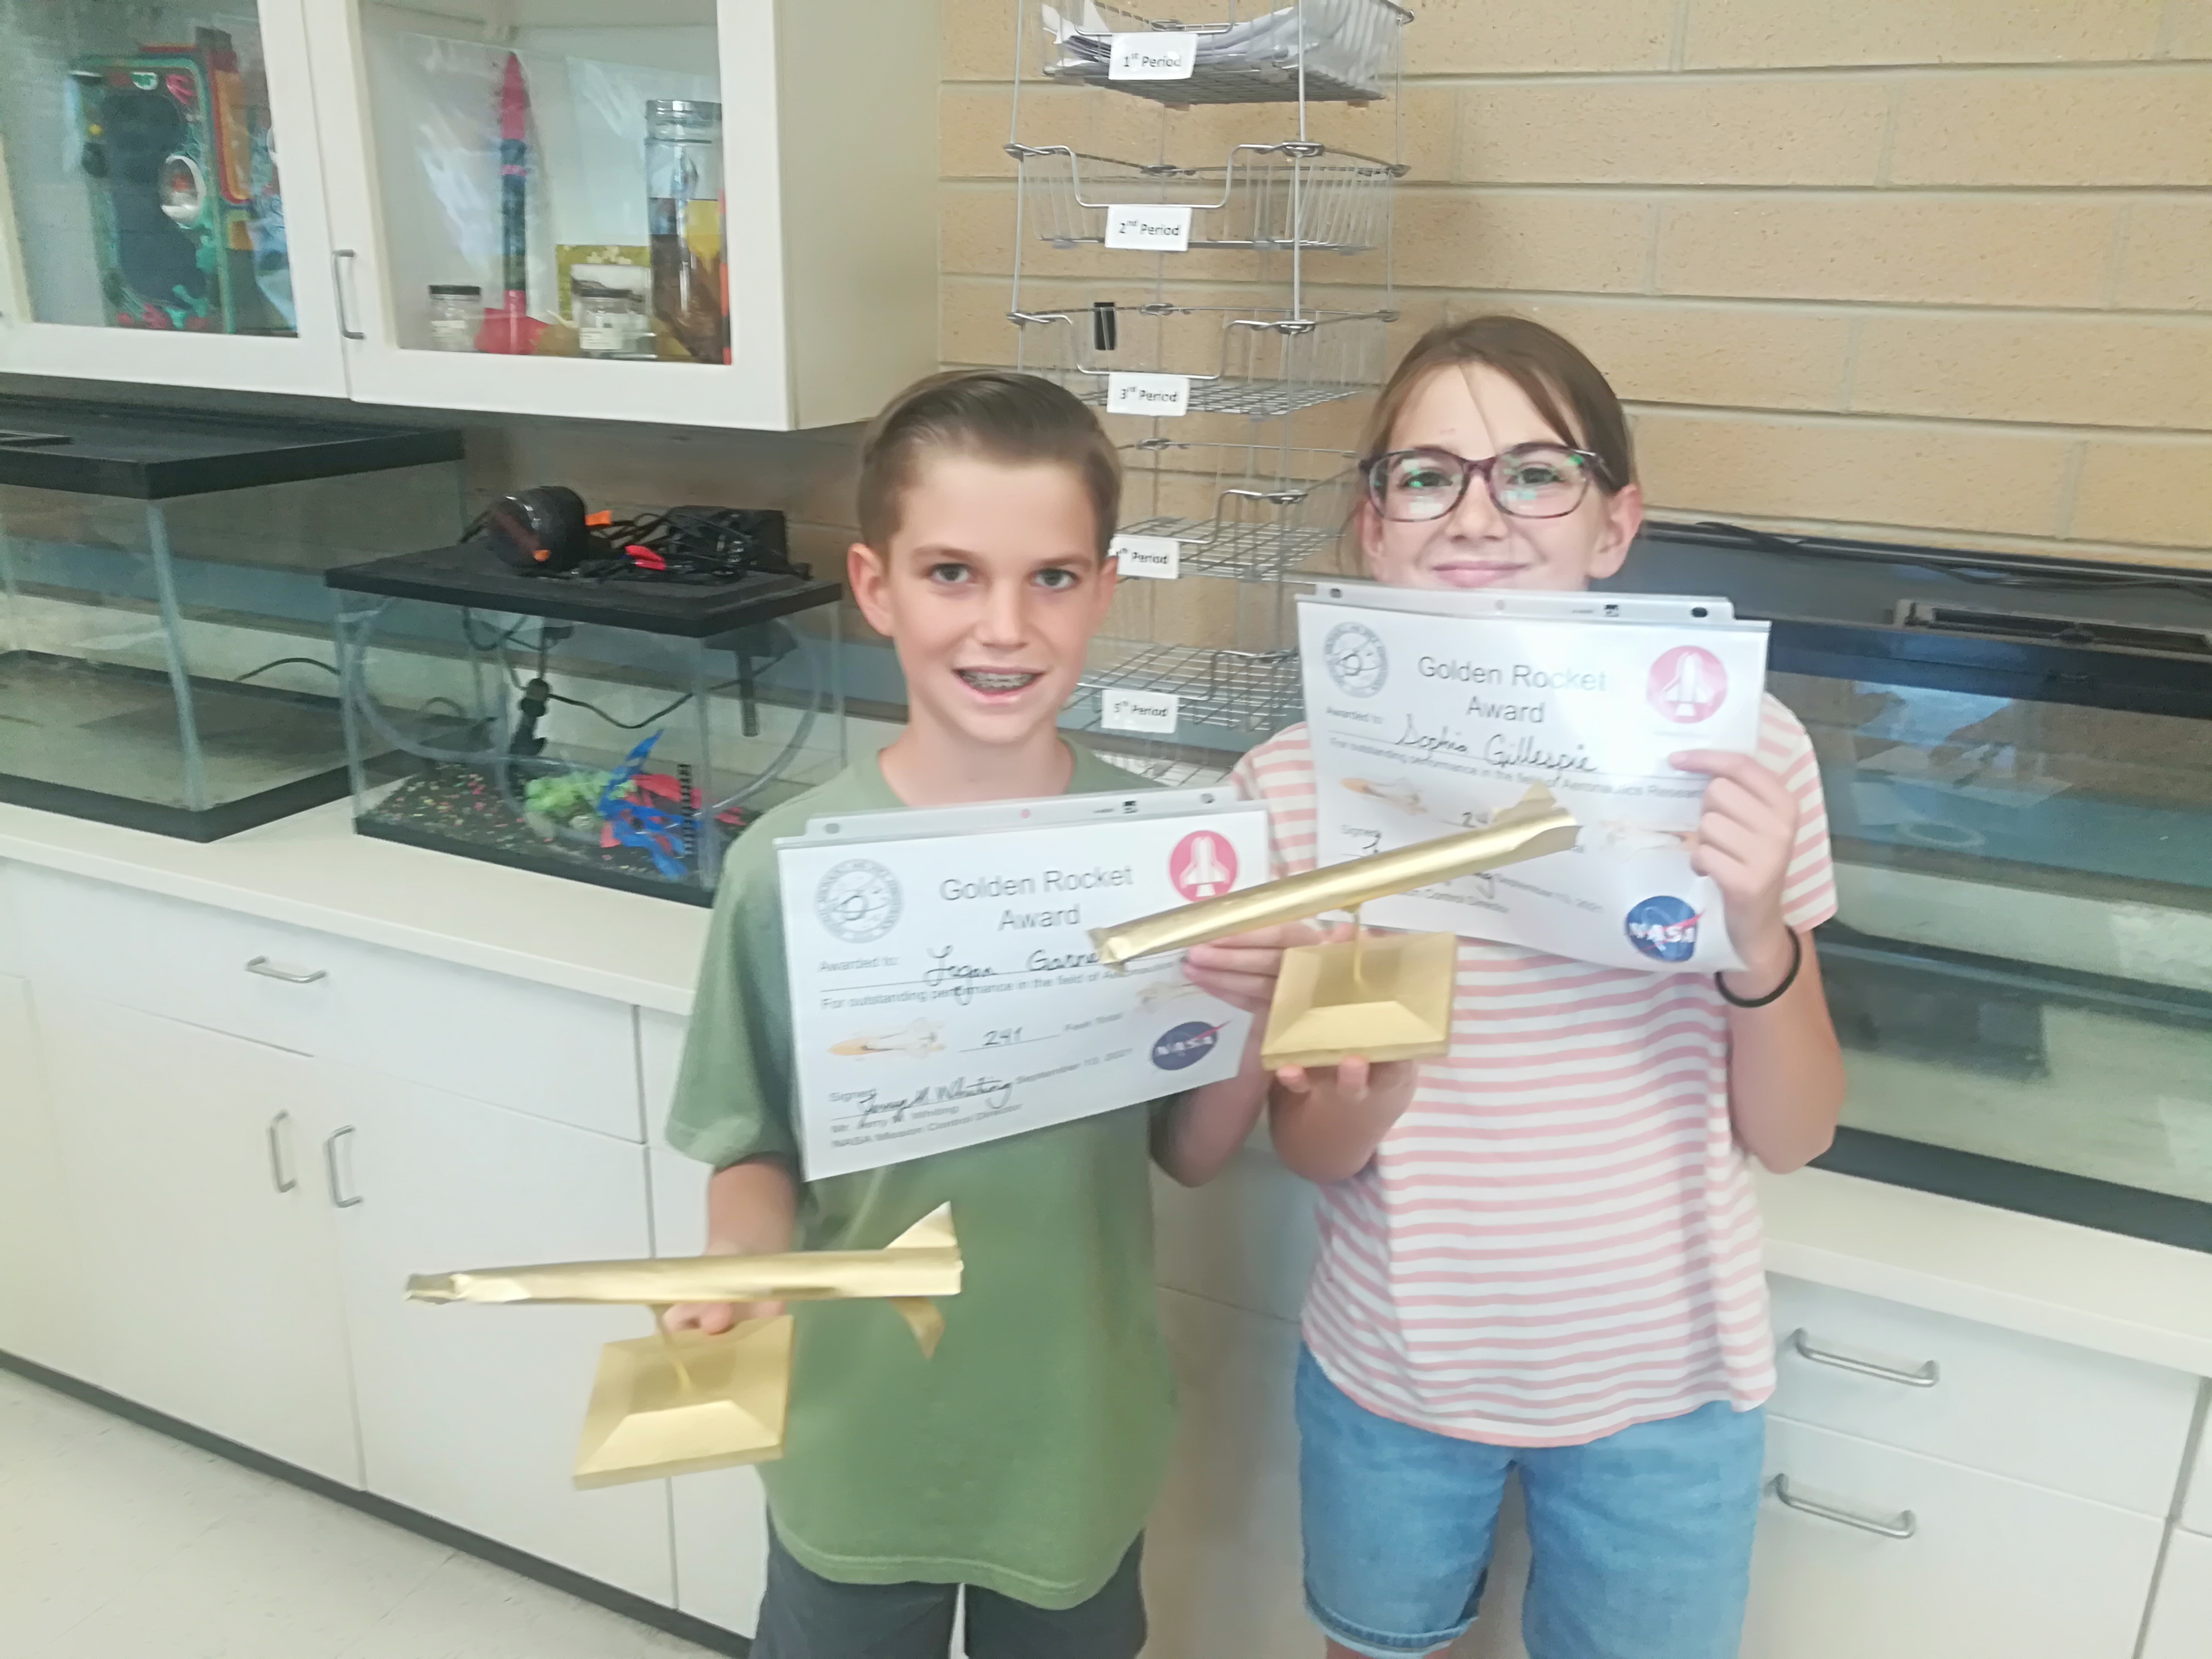 Students displaying their golden rocket trophies and certificates